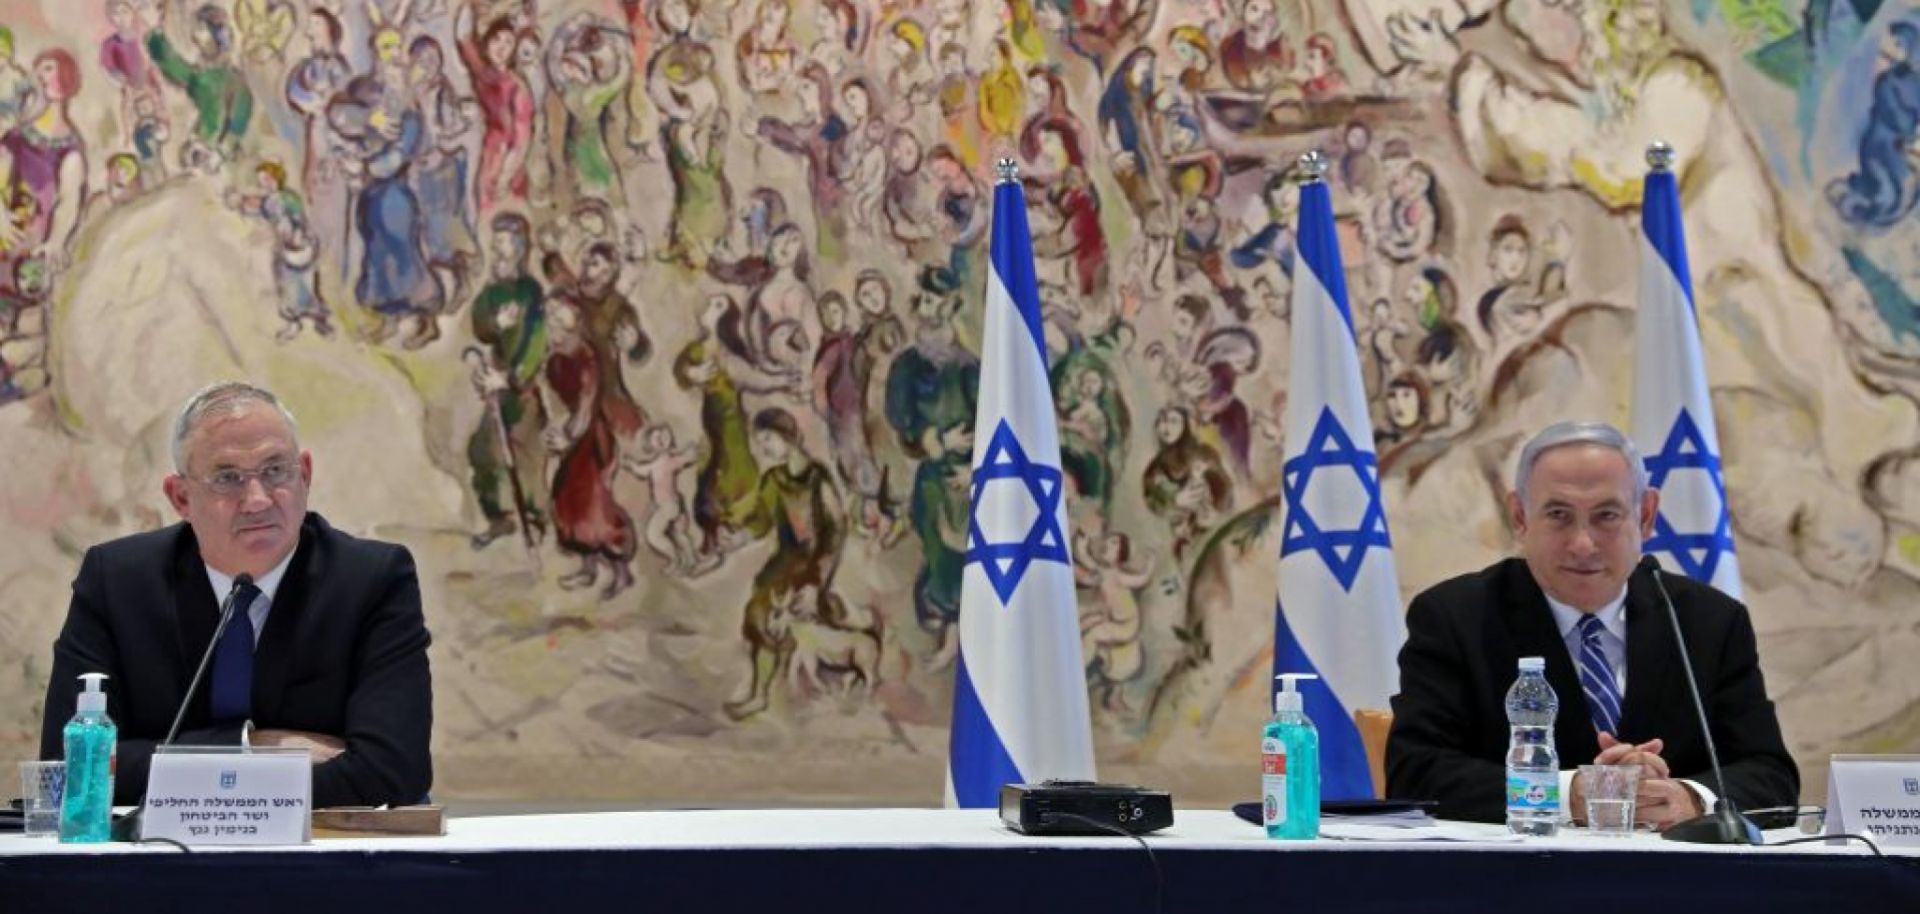 Israeli Prime Minister Benjamin Netanyahu (R) and Alternate Prime Minister and Defense Minister Benny Gantz on May 24, 2020, at a Cabinet meeting of Israel's new unity government at Chagall State Hall in the Knesset in Jerusalem.